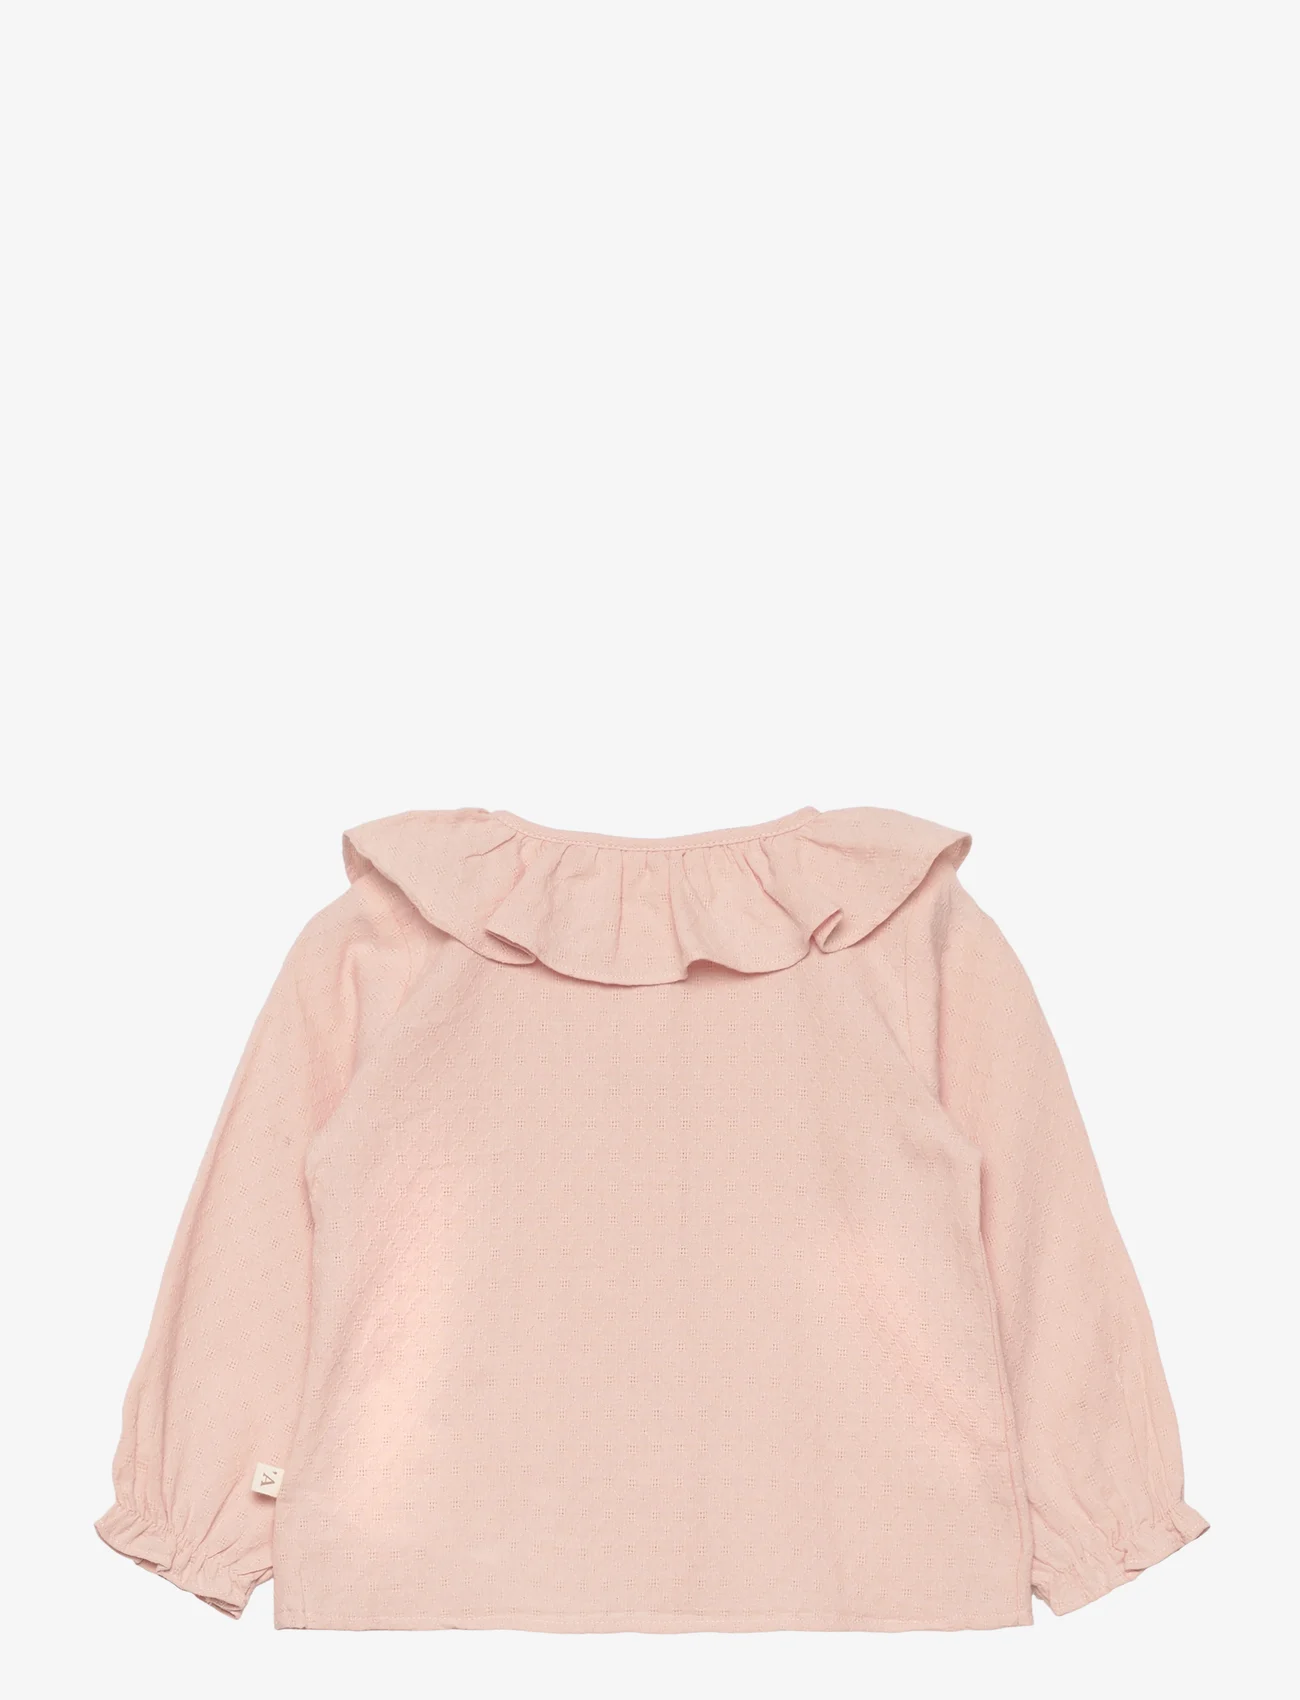 Lil'Atelier - NBFDOLLY LS LOOSE SHIRT LIL - bluser & tunikaer - rose dust - 1